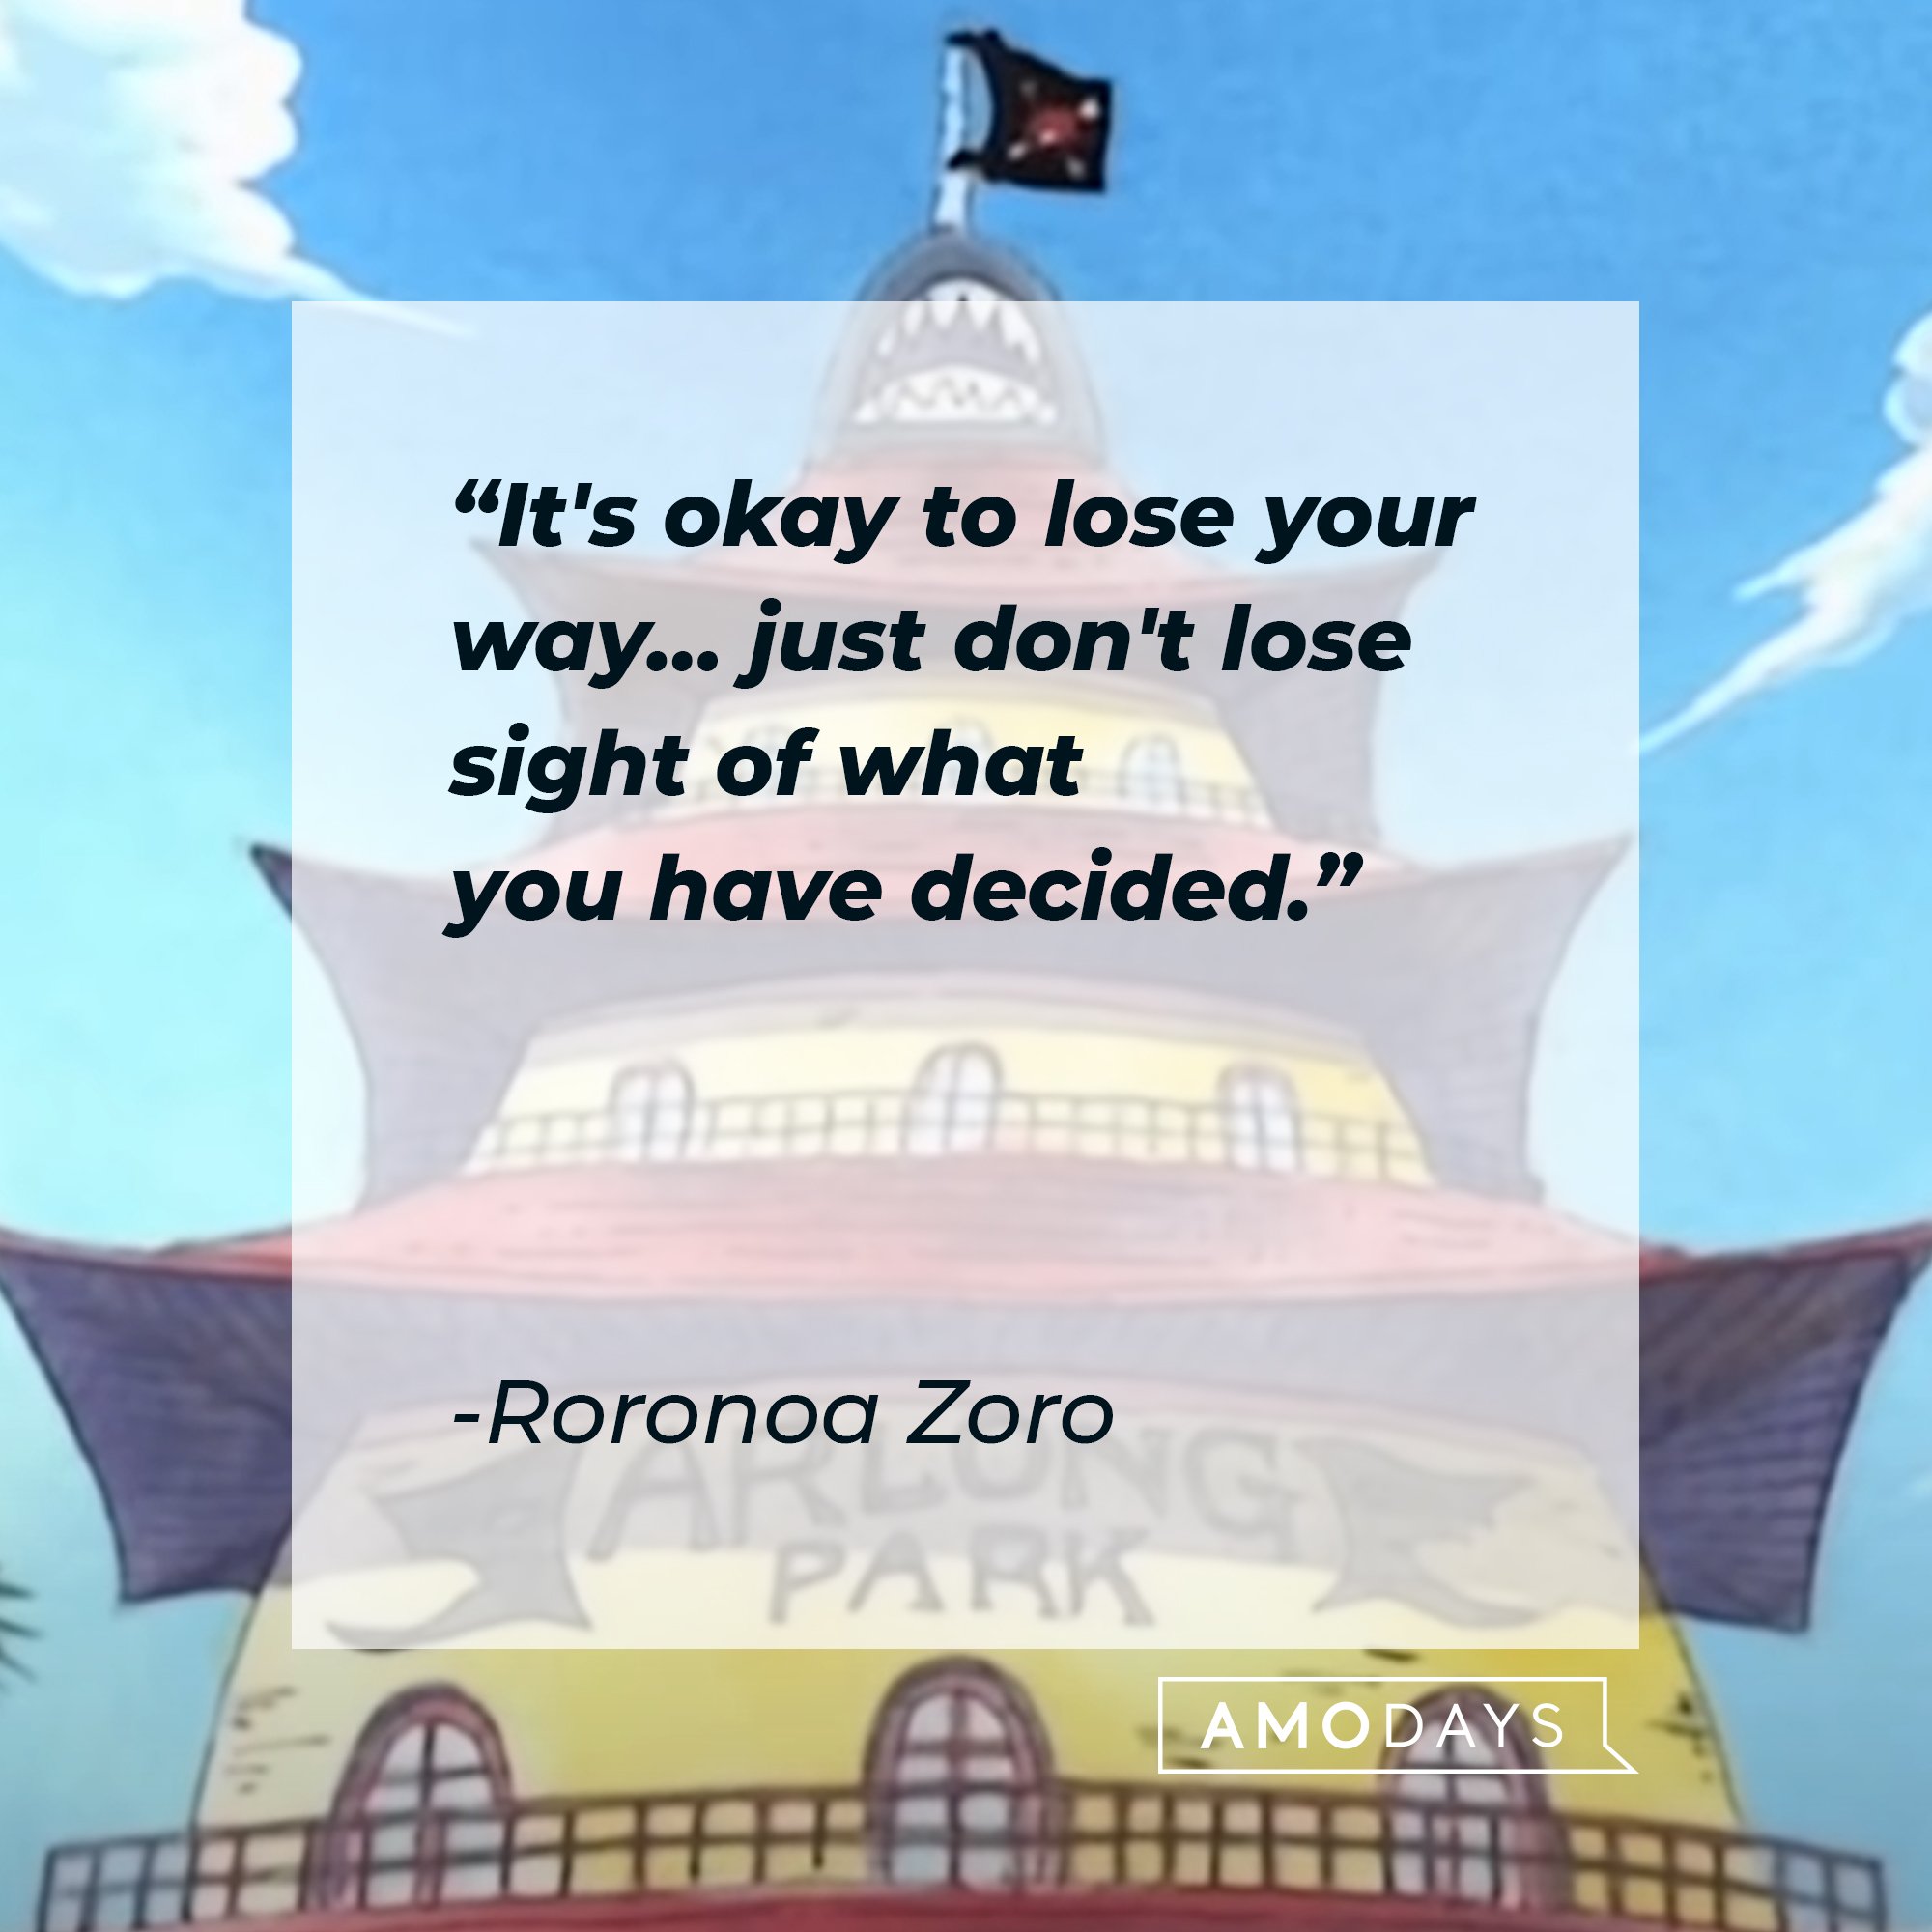  Roronoa Zoro’s quote: "It's okay to lose your way… just don't lose sight of what you have decided."  | Image: AmoDays